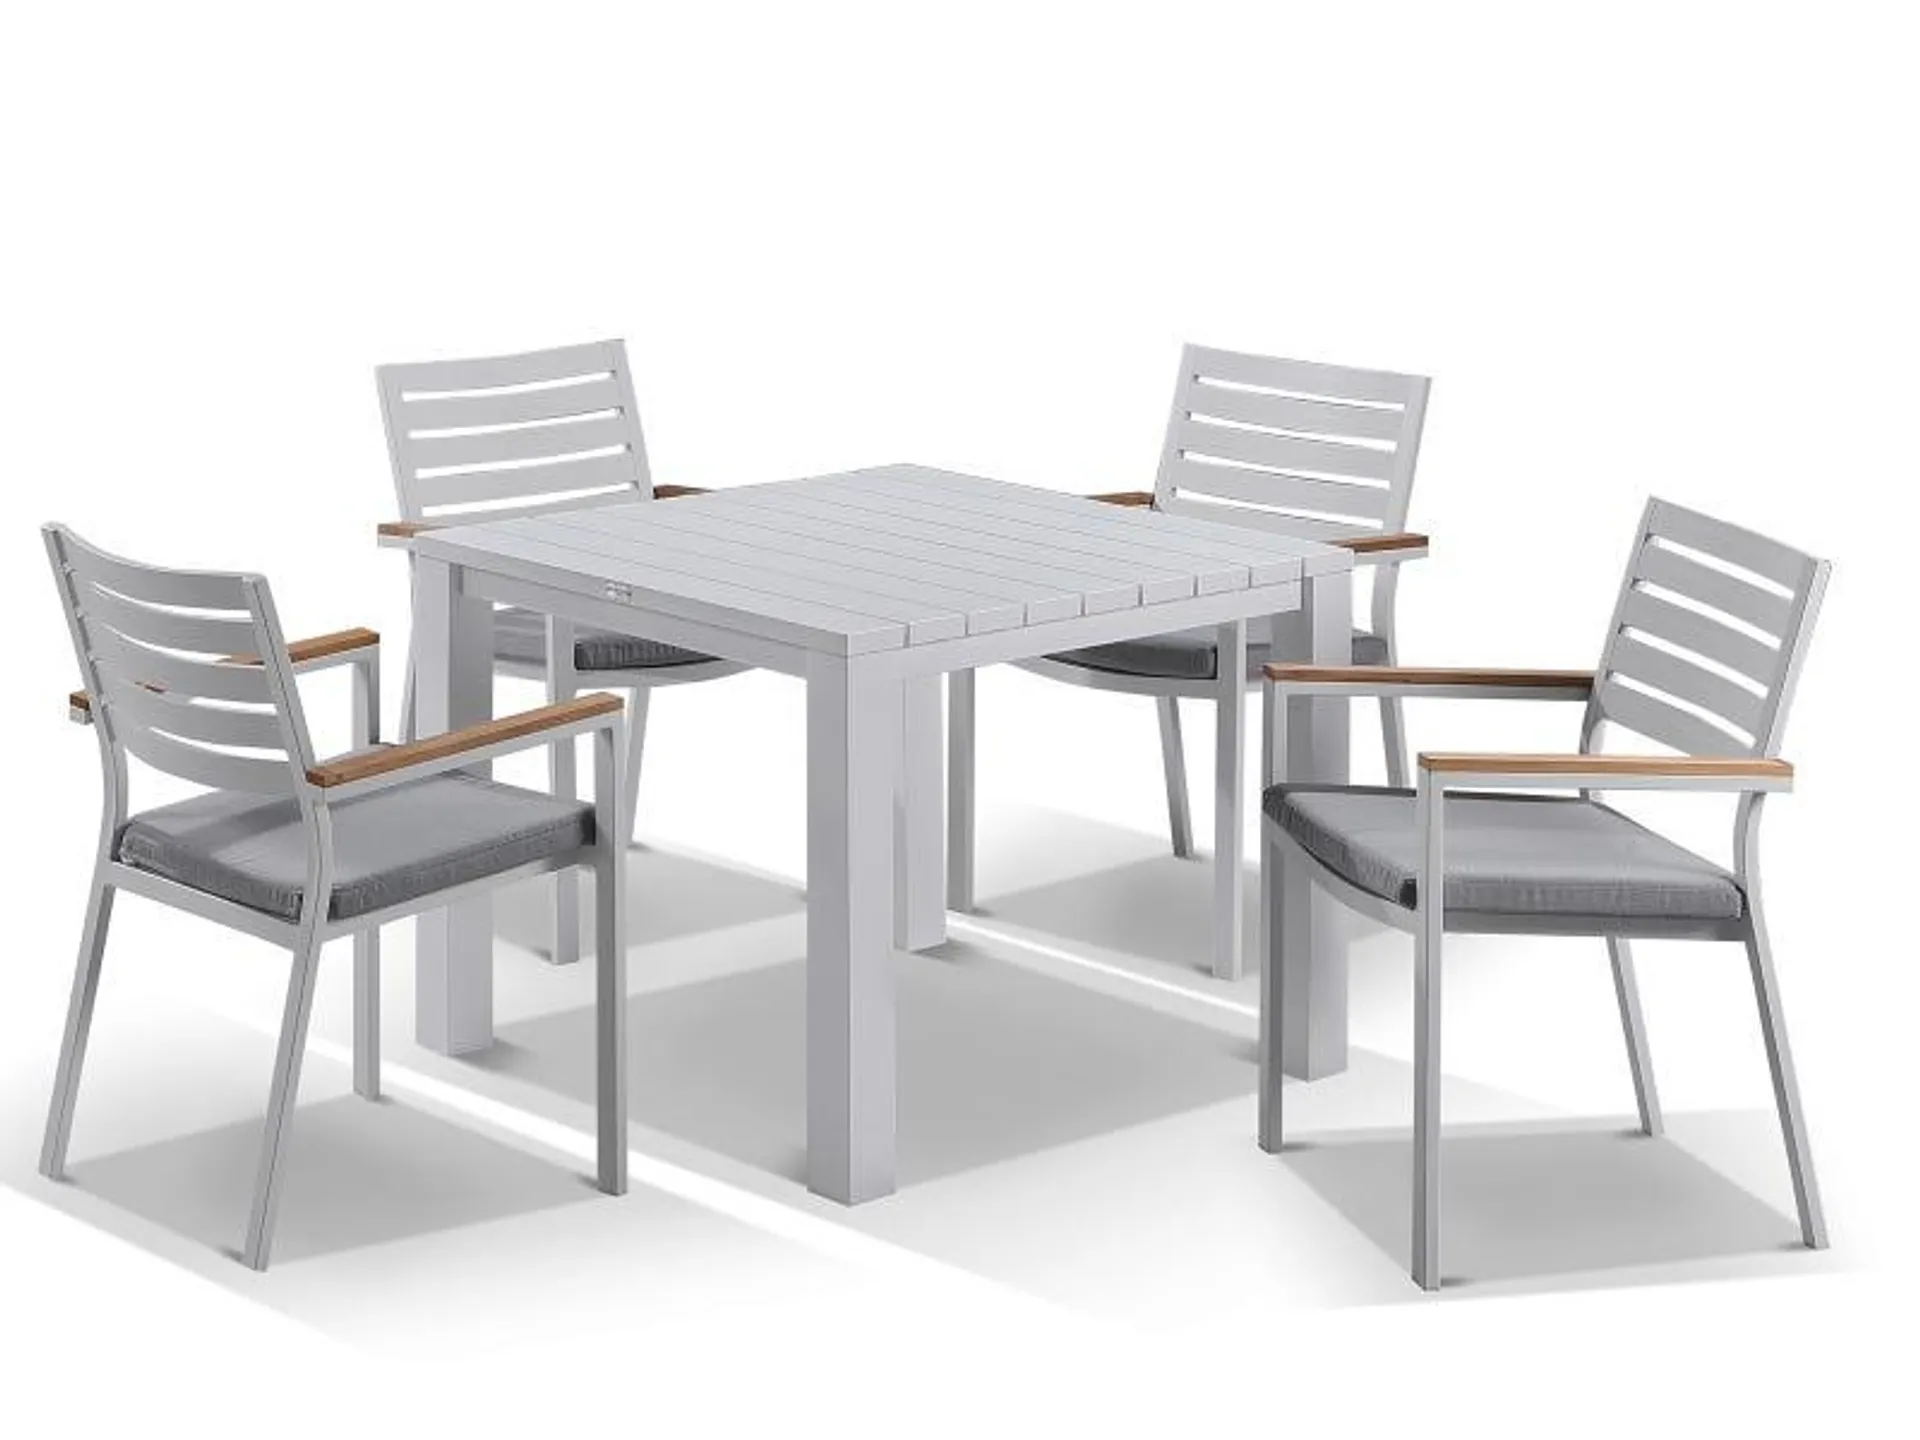 Adele table with Astra Chairs 5pc Outdoor Dining Setting